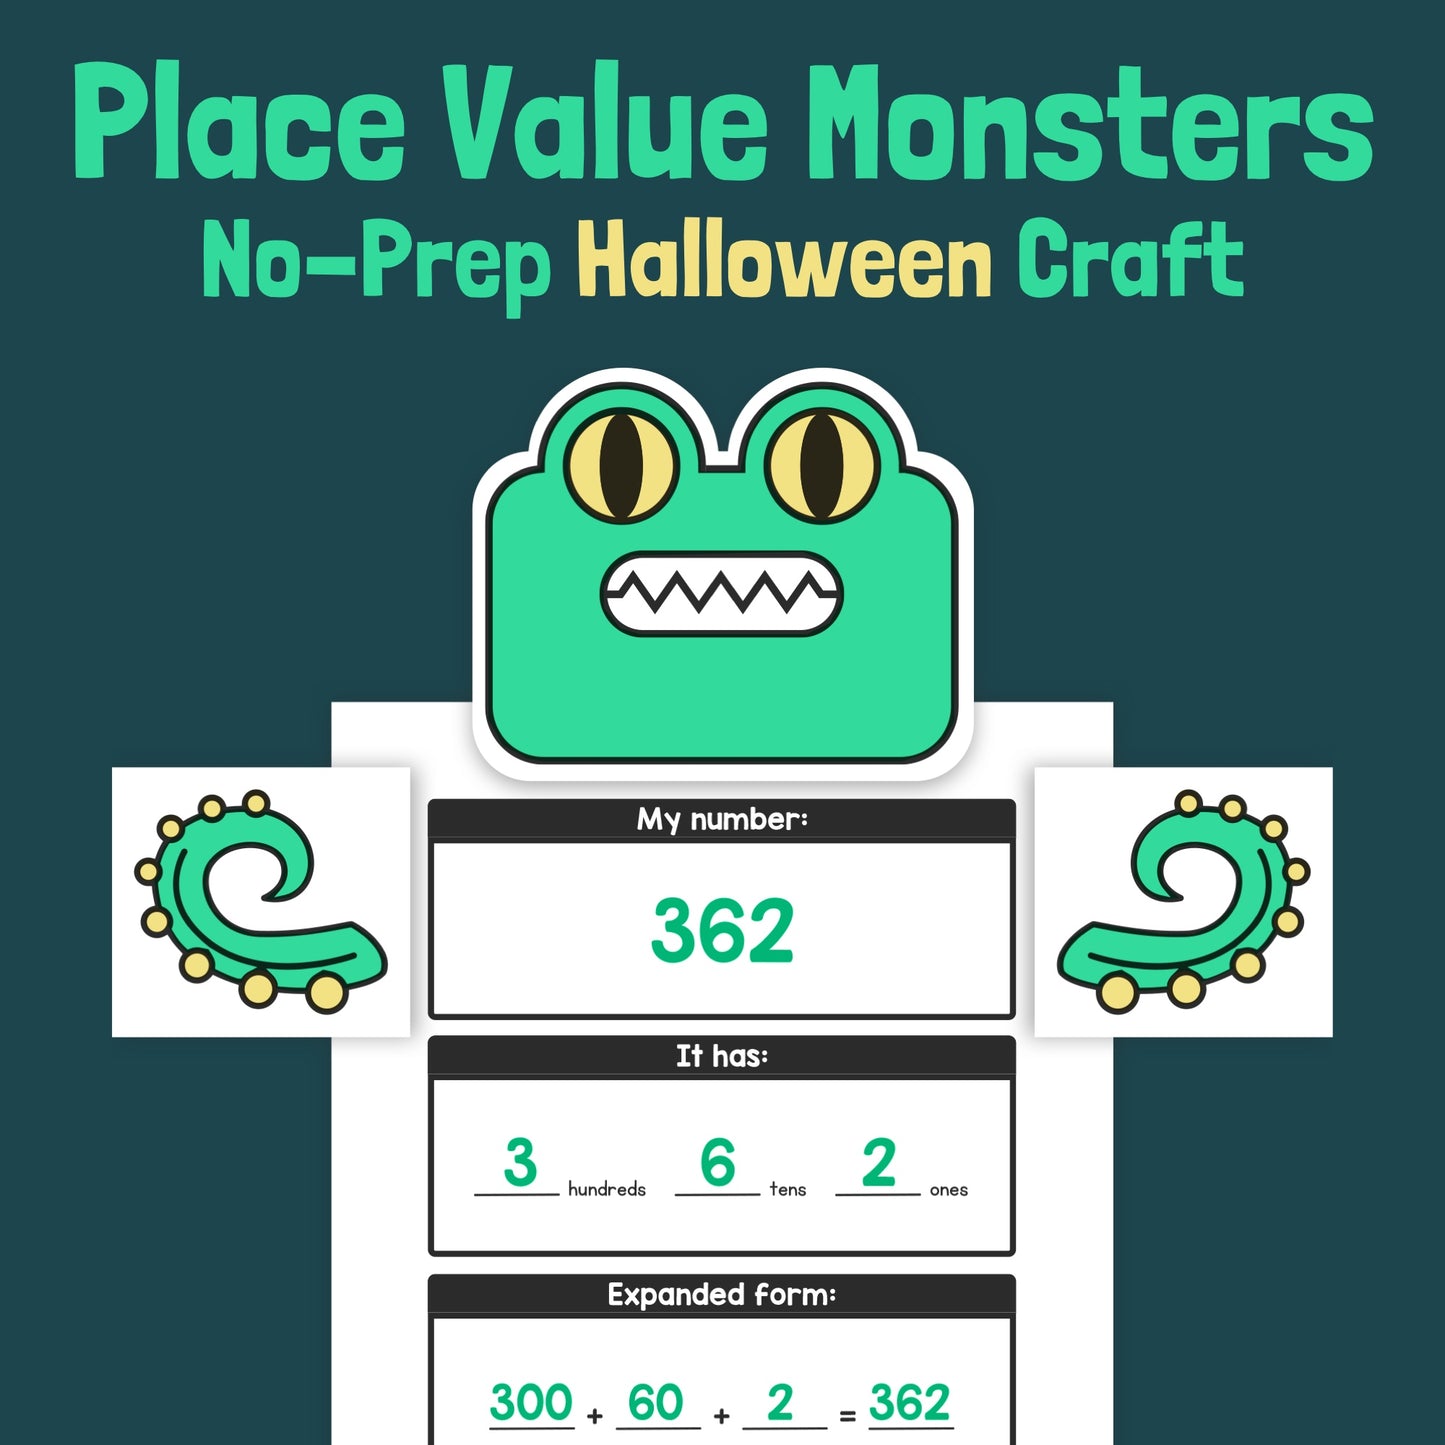 Place Value Monster Craft